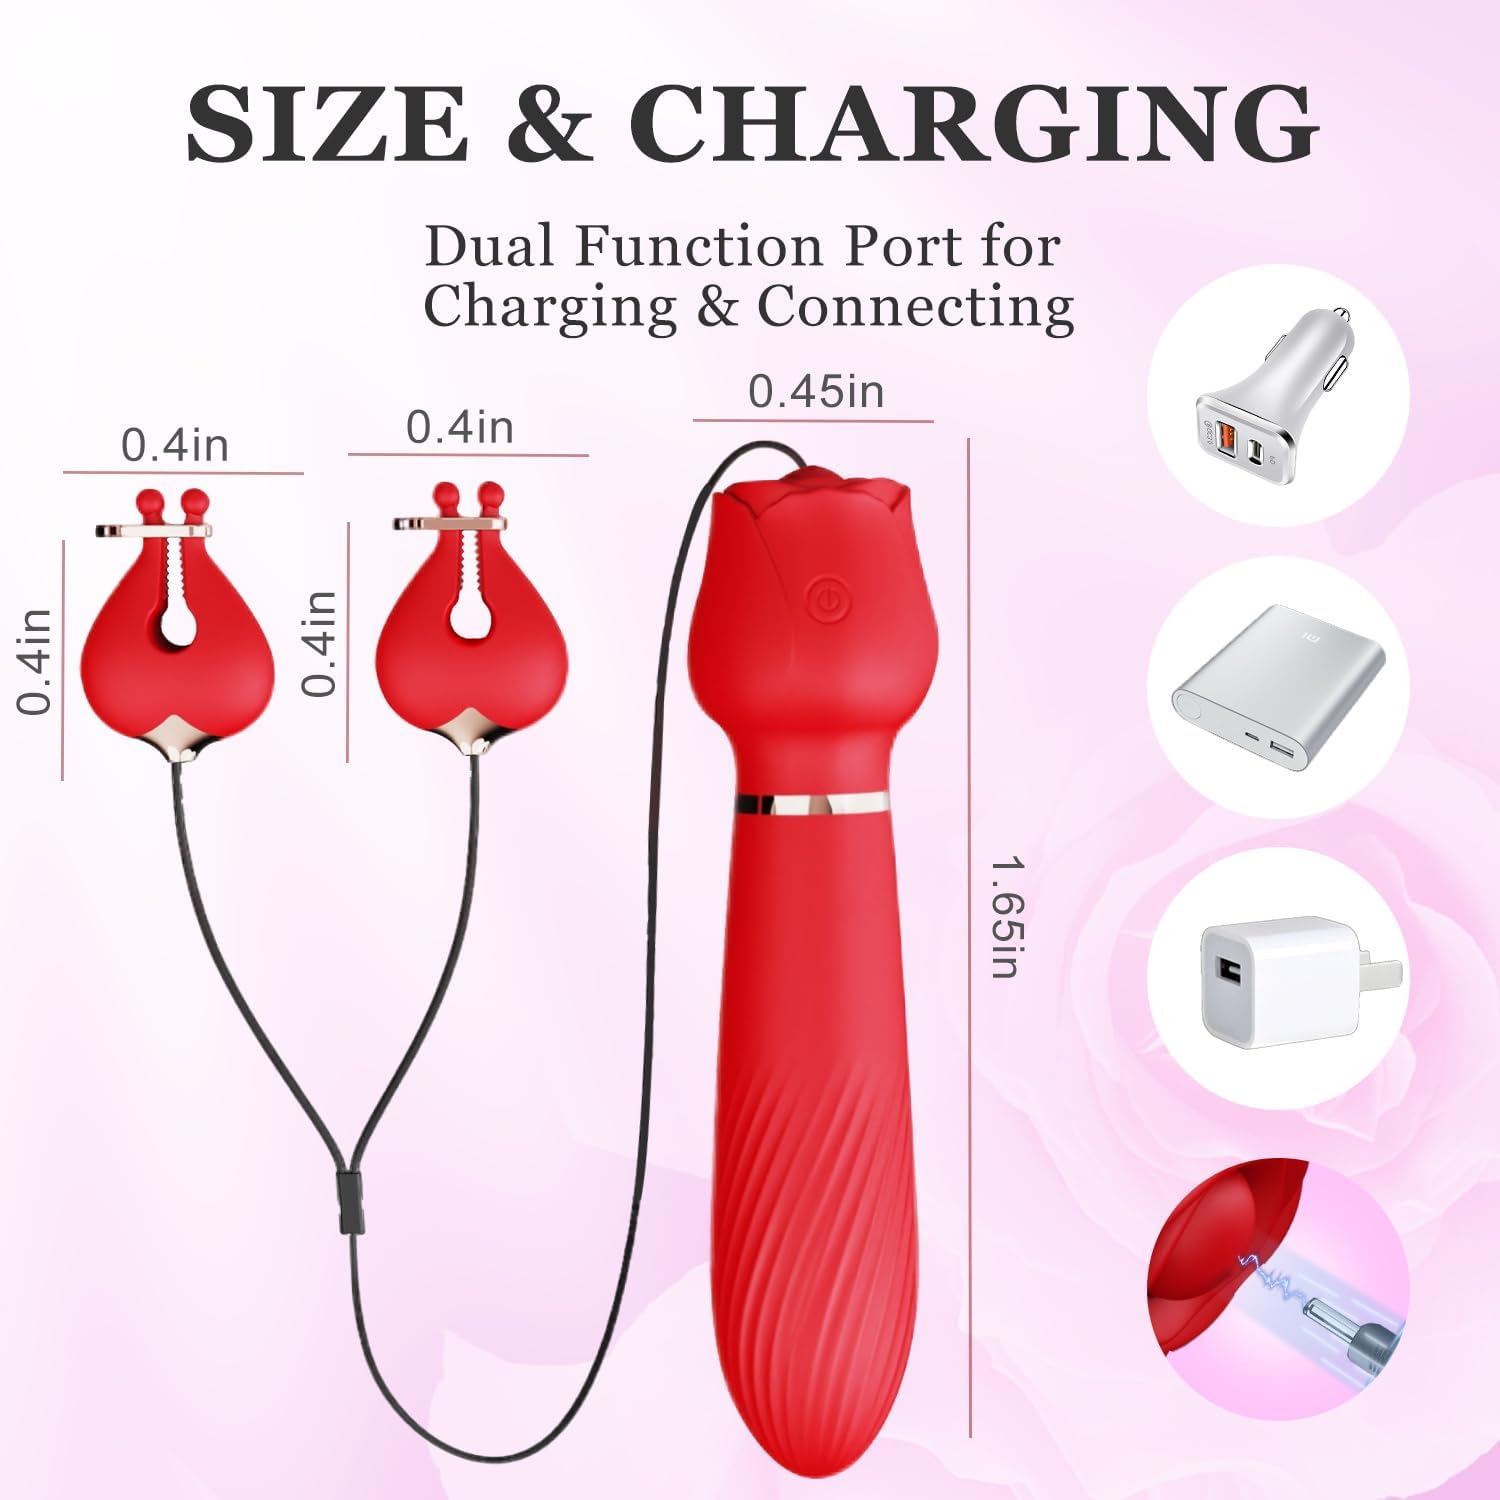 2 in 1 Nipple Toys Adult Sex Toys for Women, G Spot Vibrator Women Sex Toys with 10 Vibration Modes, Portable Size Vibrating Nipple Clamps, Rechargeable & Waterproof Female Sex Toys for Pleasure